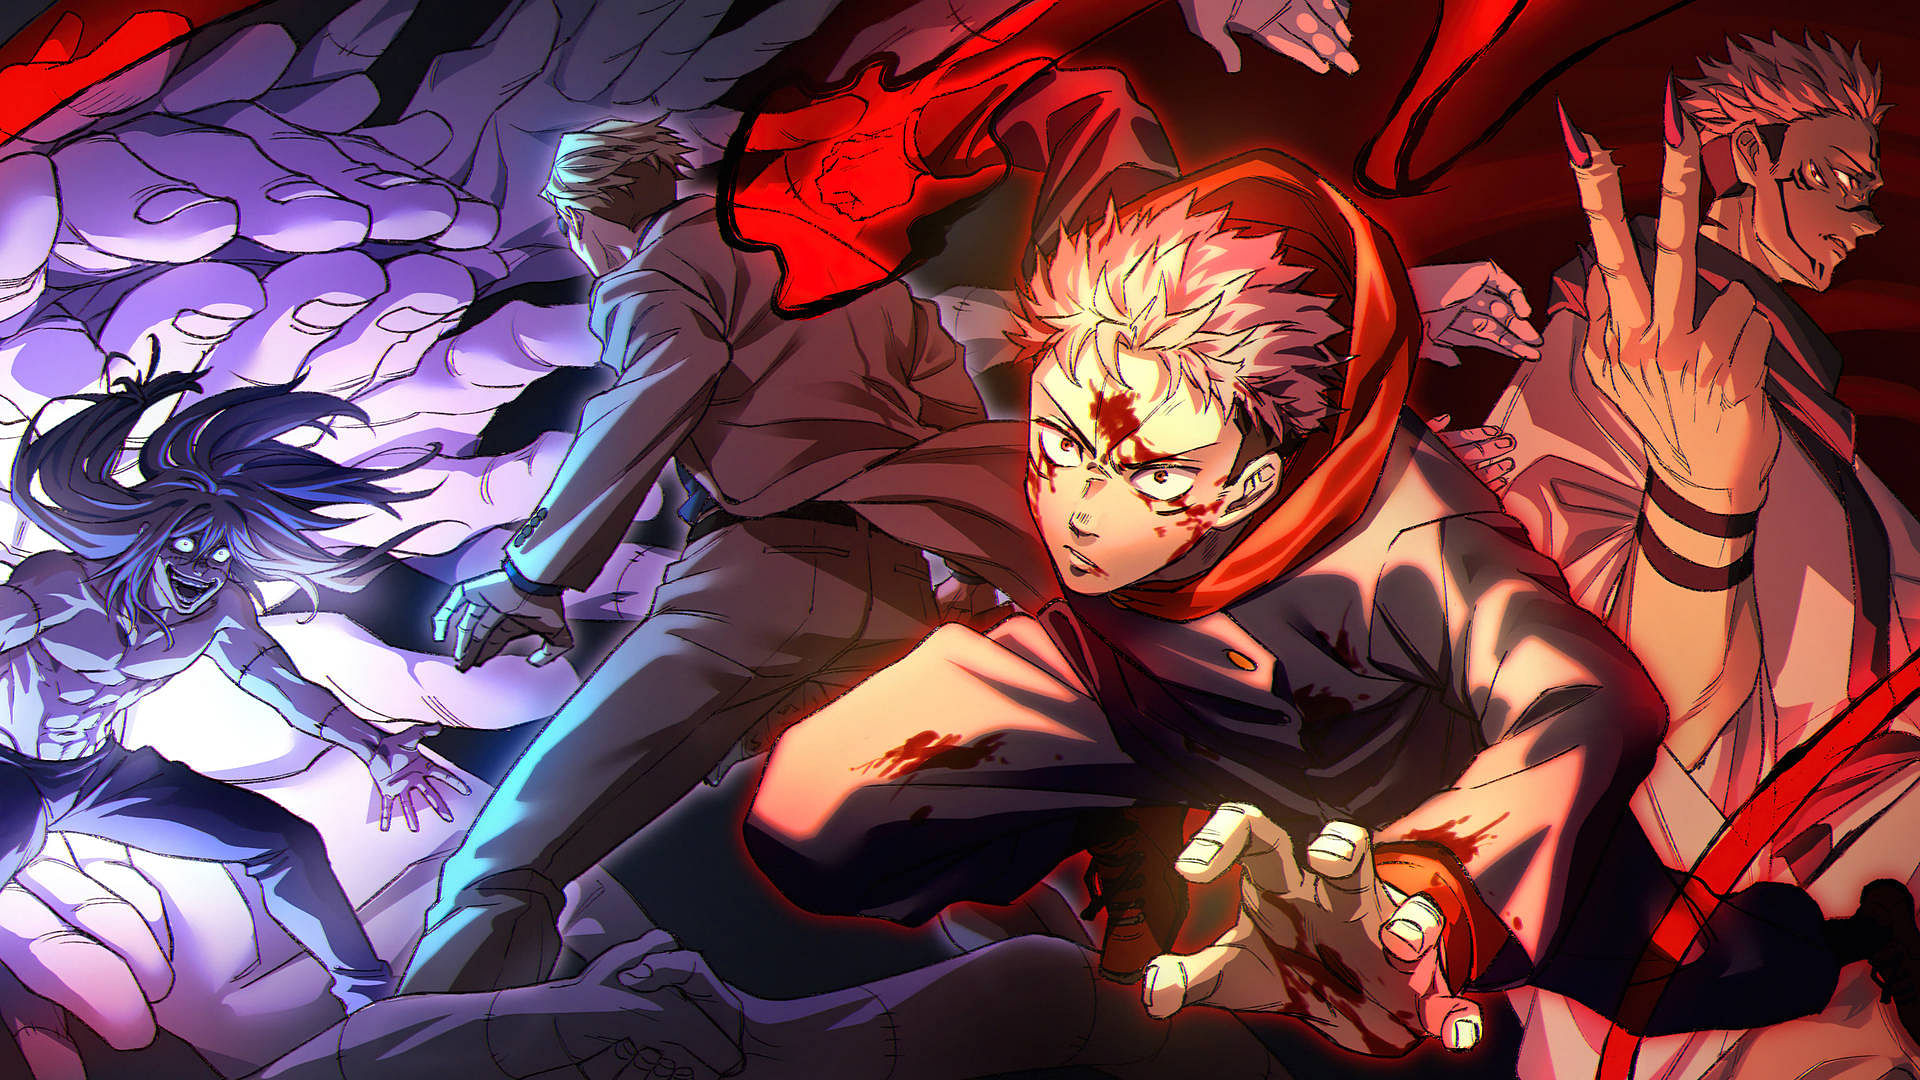 Tengen Jujutsu Kaisen 4k Wallpaper,HD Anime Wallpapers,4k Wallpapers,Images, Backgrounds,Photos and Pictures